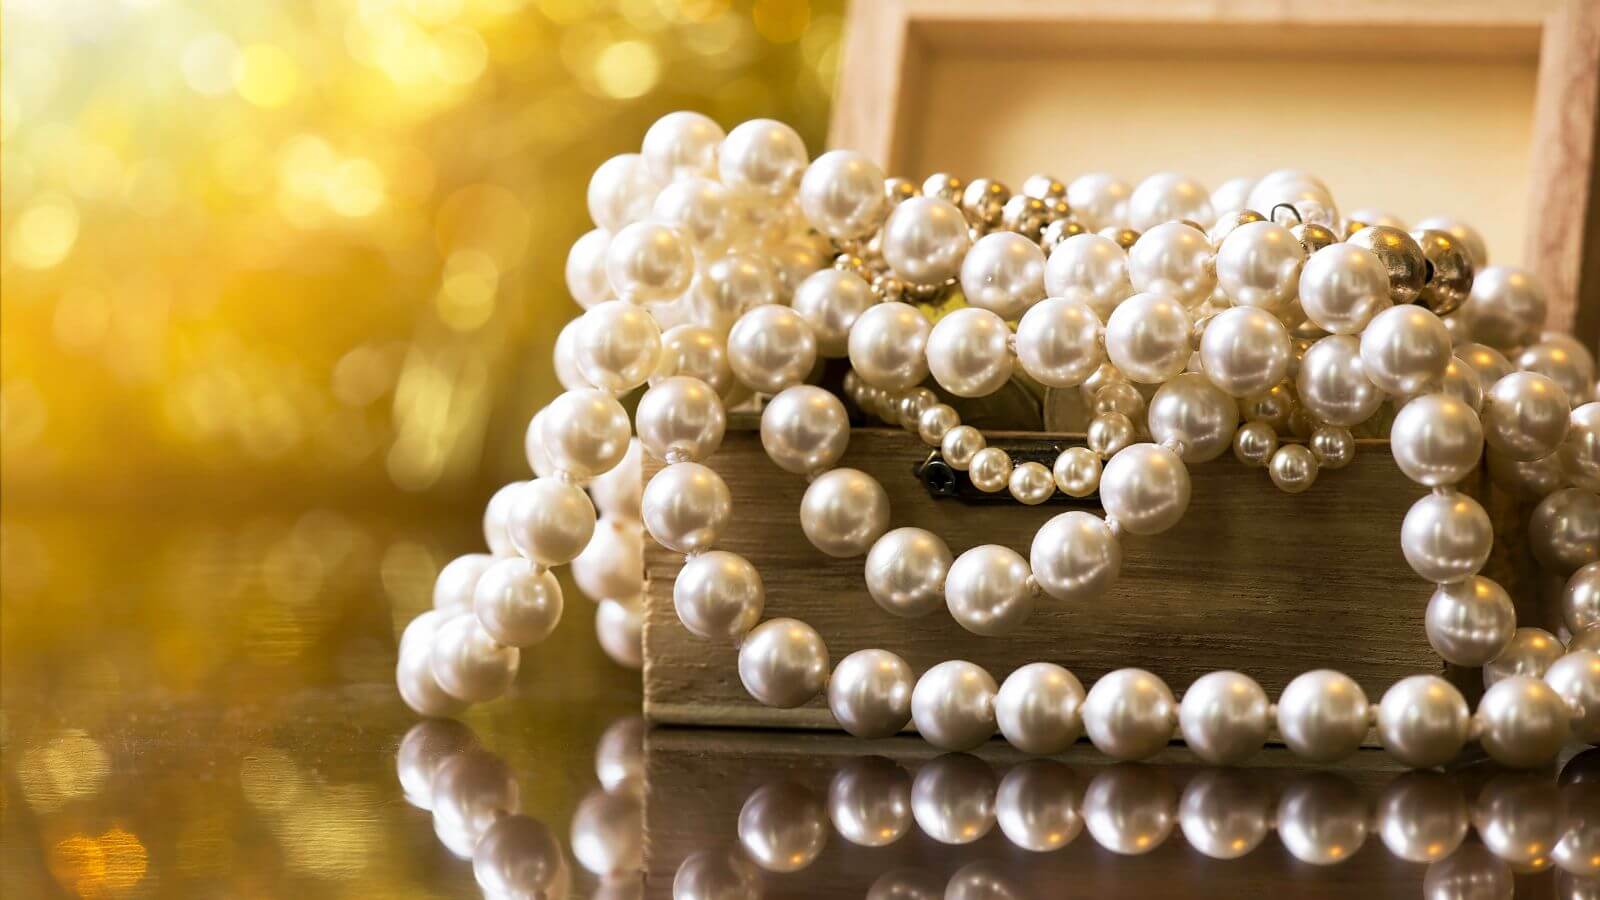 pile of pearls in a wooden box